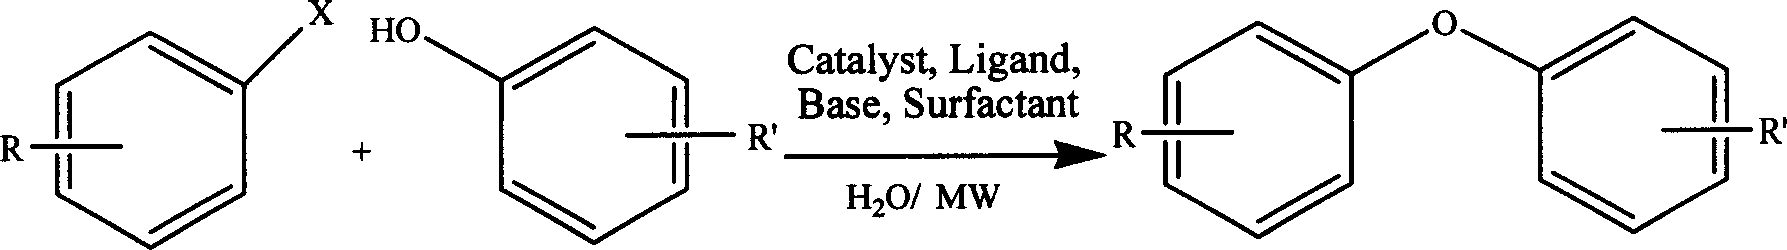 Water heating synthesis of diaryl ether